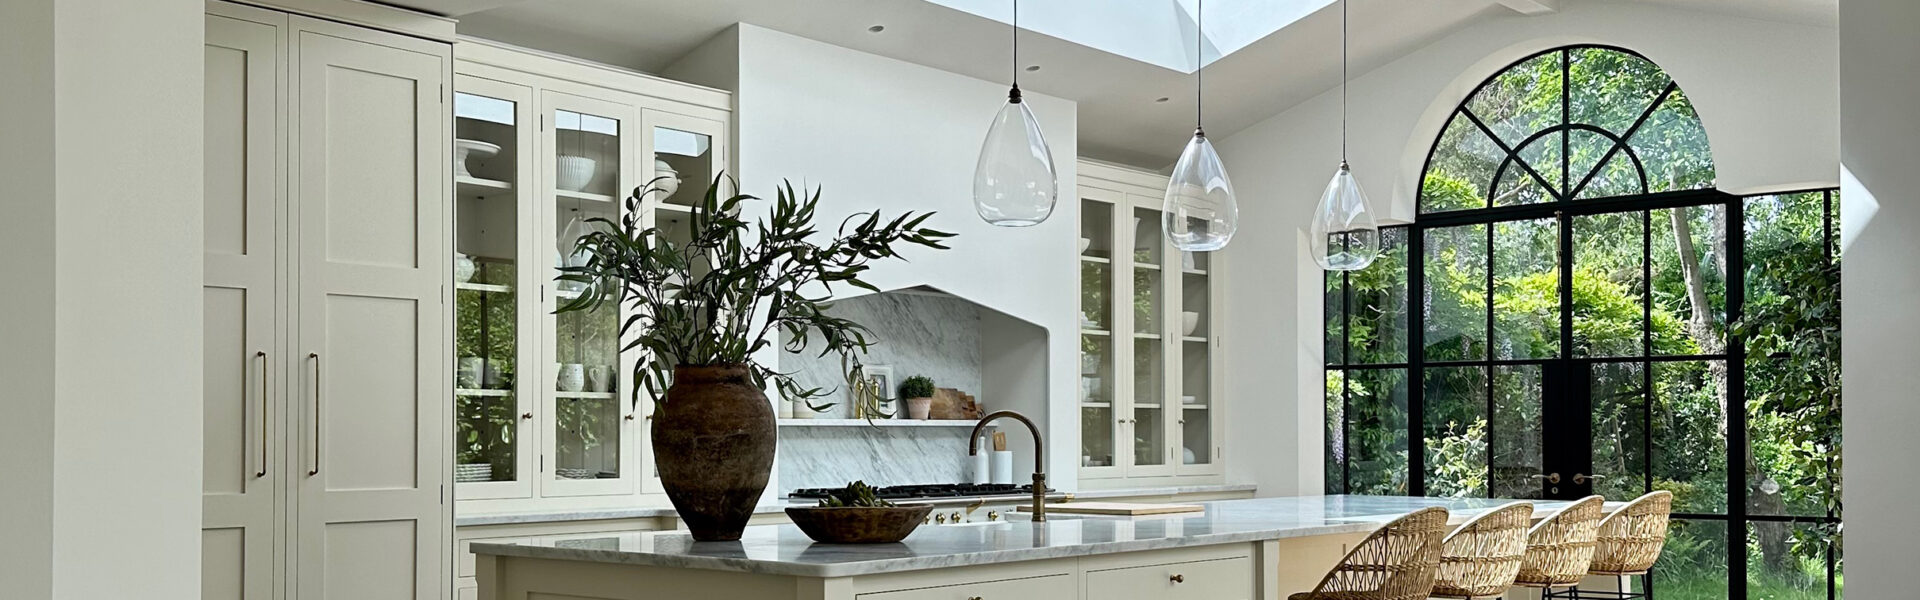 White kitchen with large central island, illuminated by three Fritz Fryer clear glass pendant lights hanging from the ceiling, enhancing the ambiance.